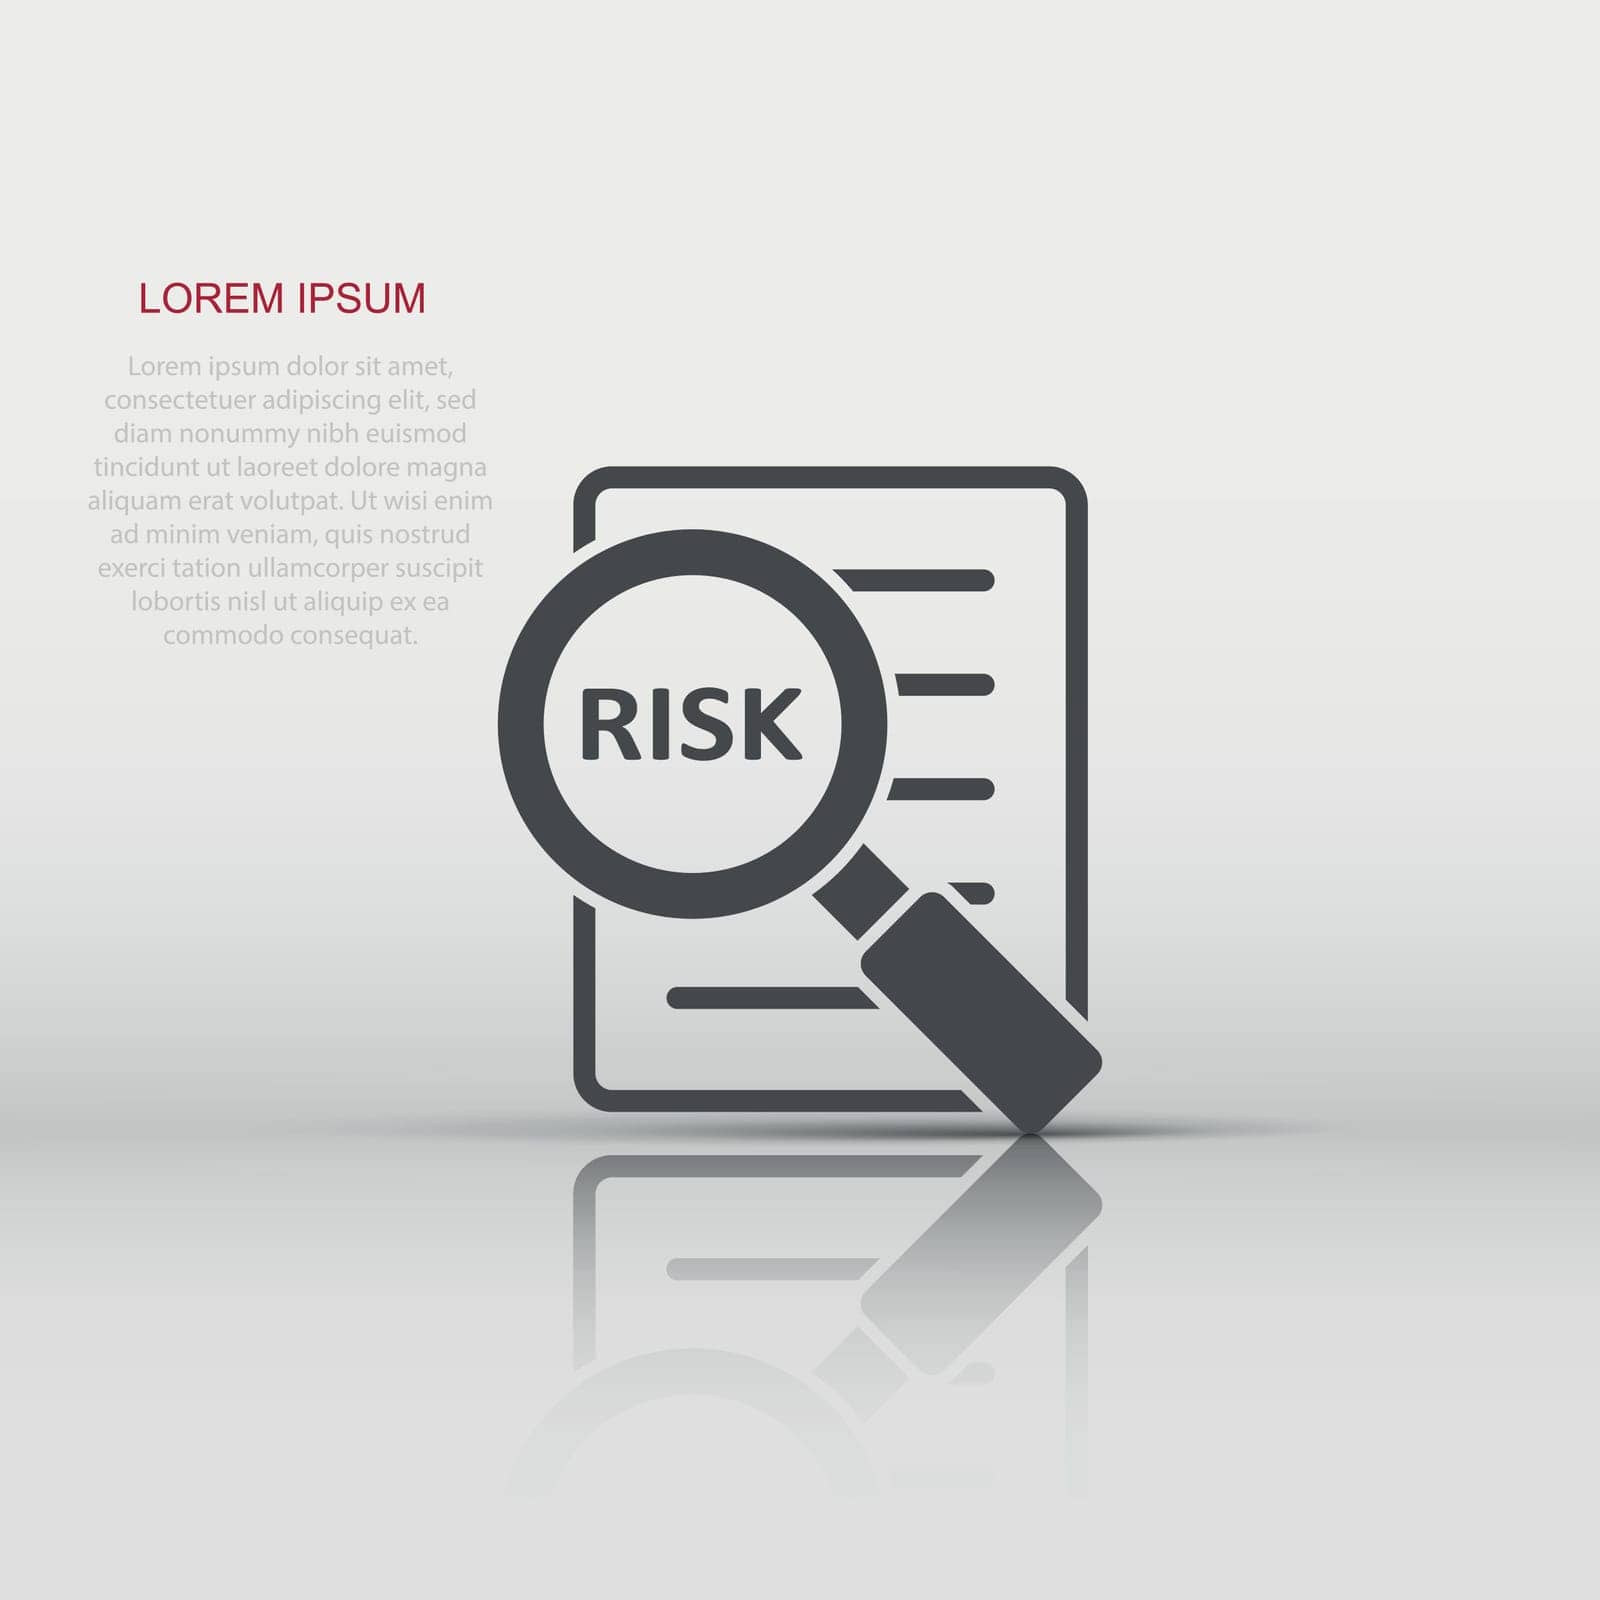 Risk management icon in flat style. Document vector illustration on white isolated background. Assessment data sign business concept. by LysenkoA